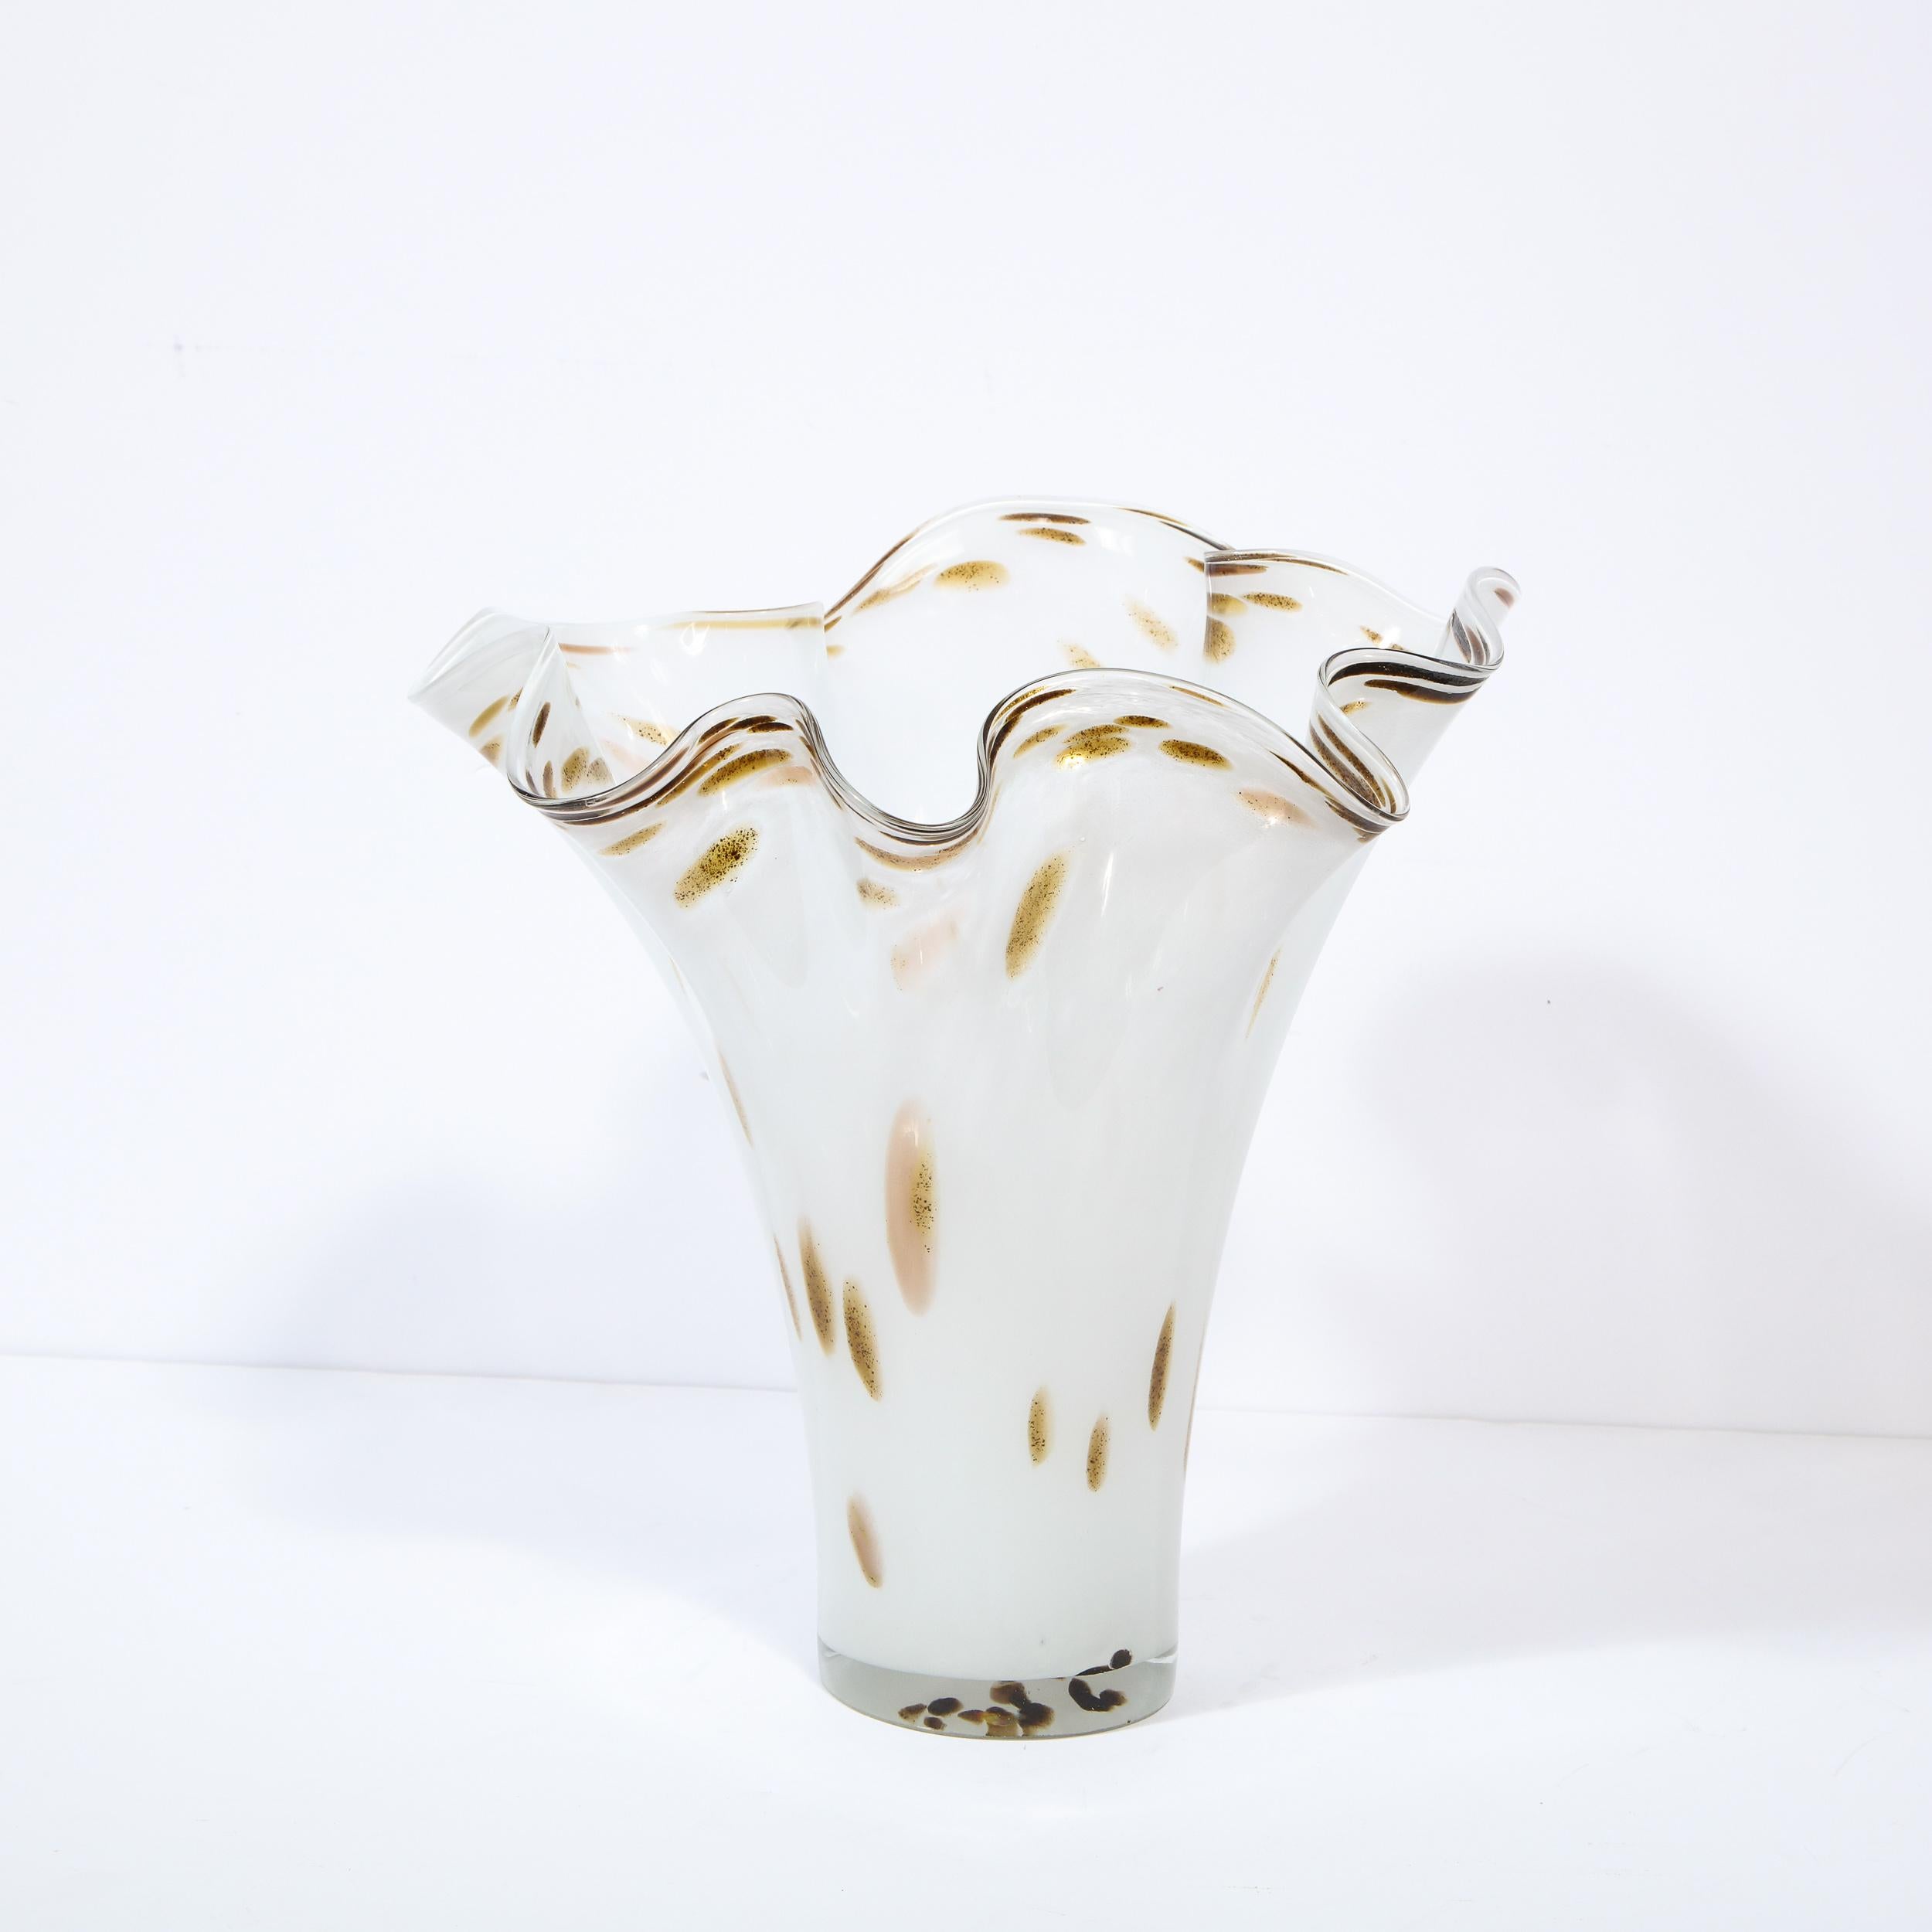 This stunning Mid-Century Modern vase was realized in Murano, Italy- the island off the coast of Venice renowned for centuries for its superlative glass production- circa 1960. It features a cylindrical body in white glass with java and cafe au lait